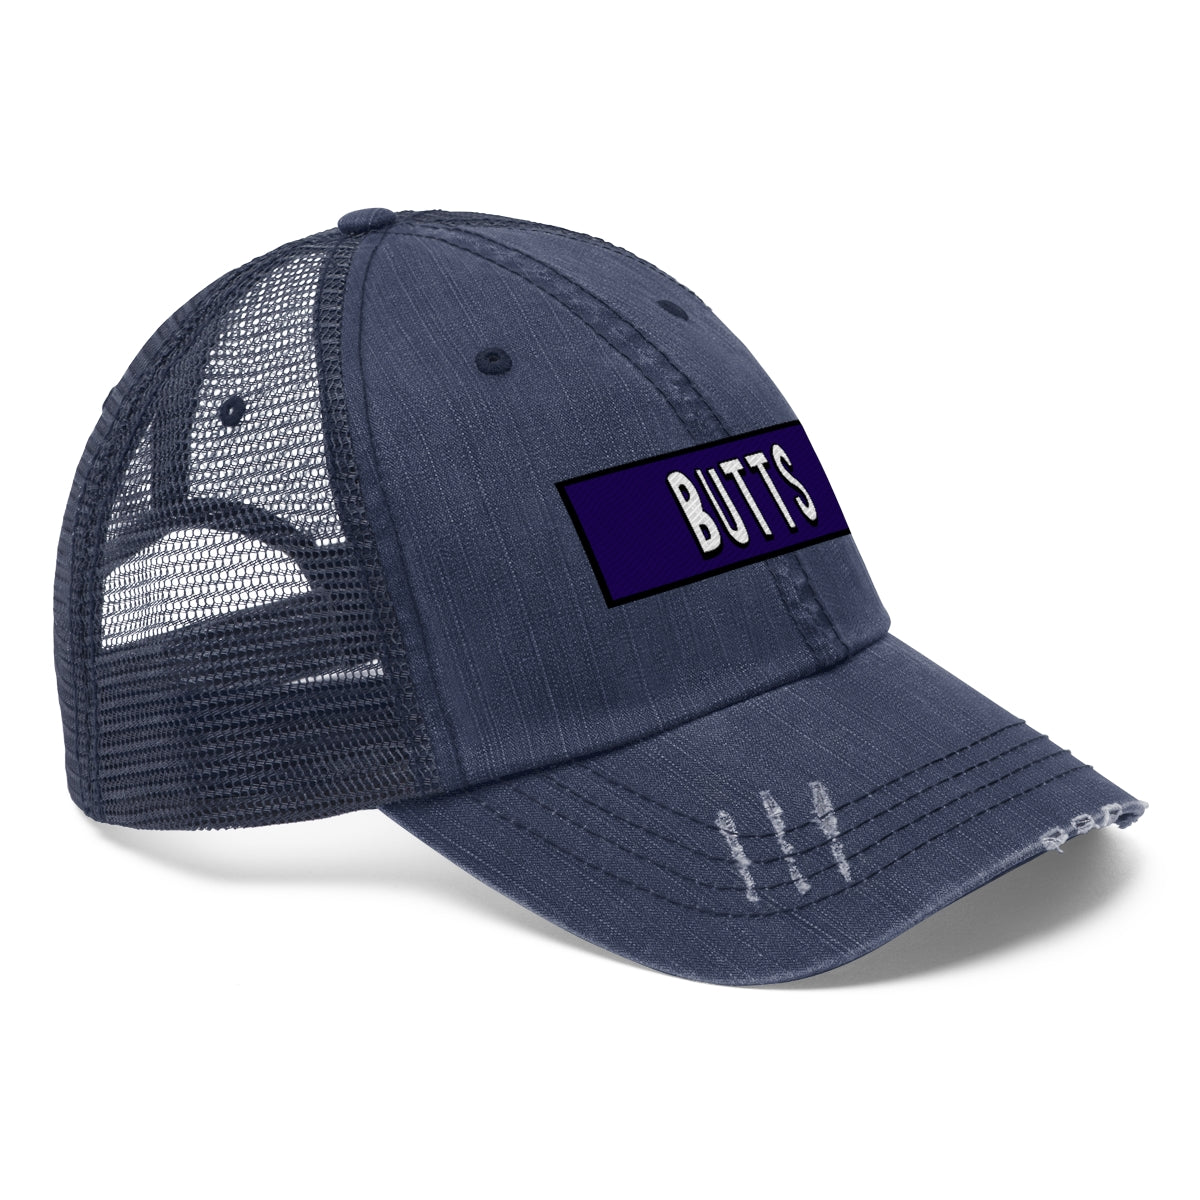 Butts Embroidered Trucker Hat - Just Like Bob Bob's Burgers